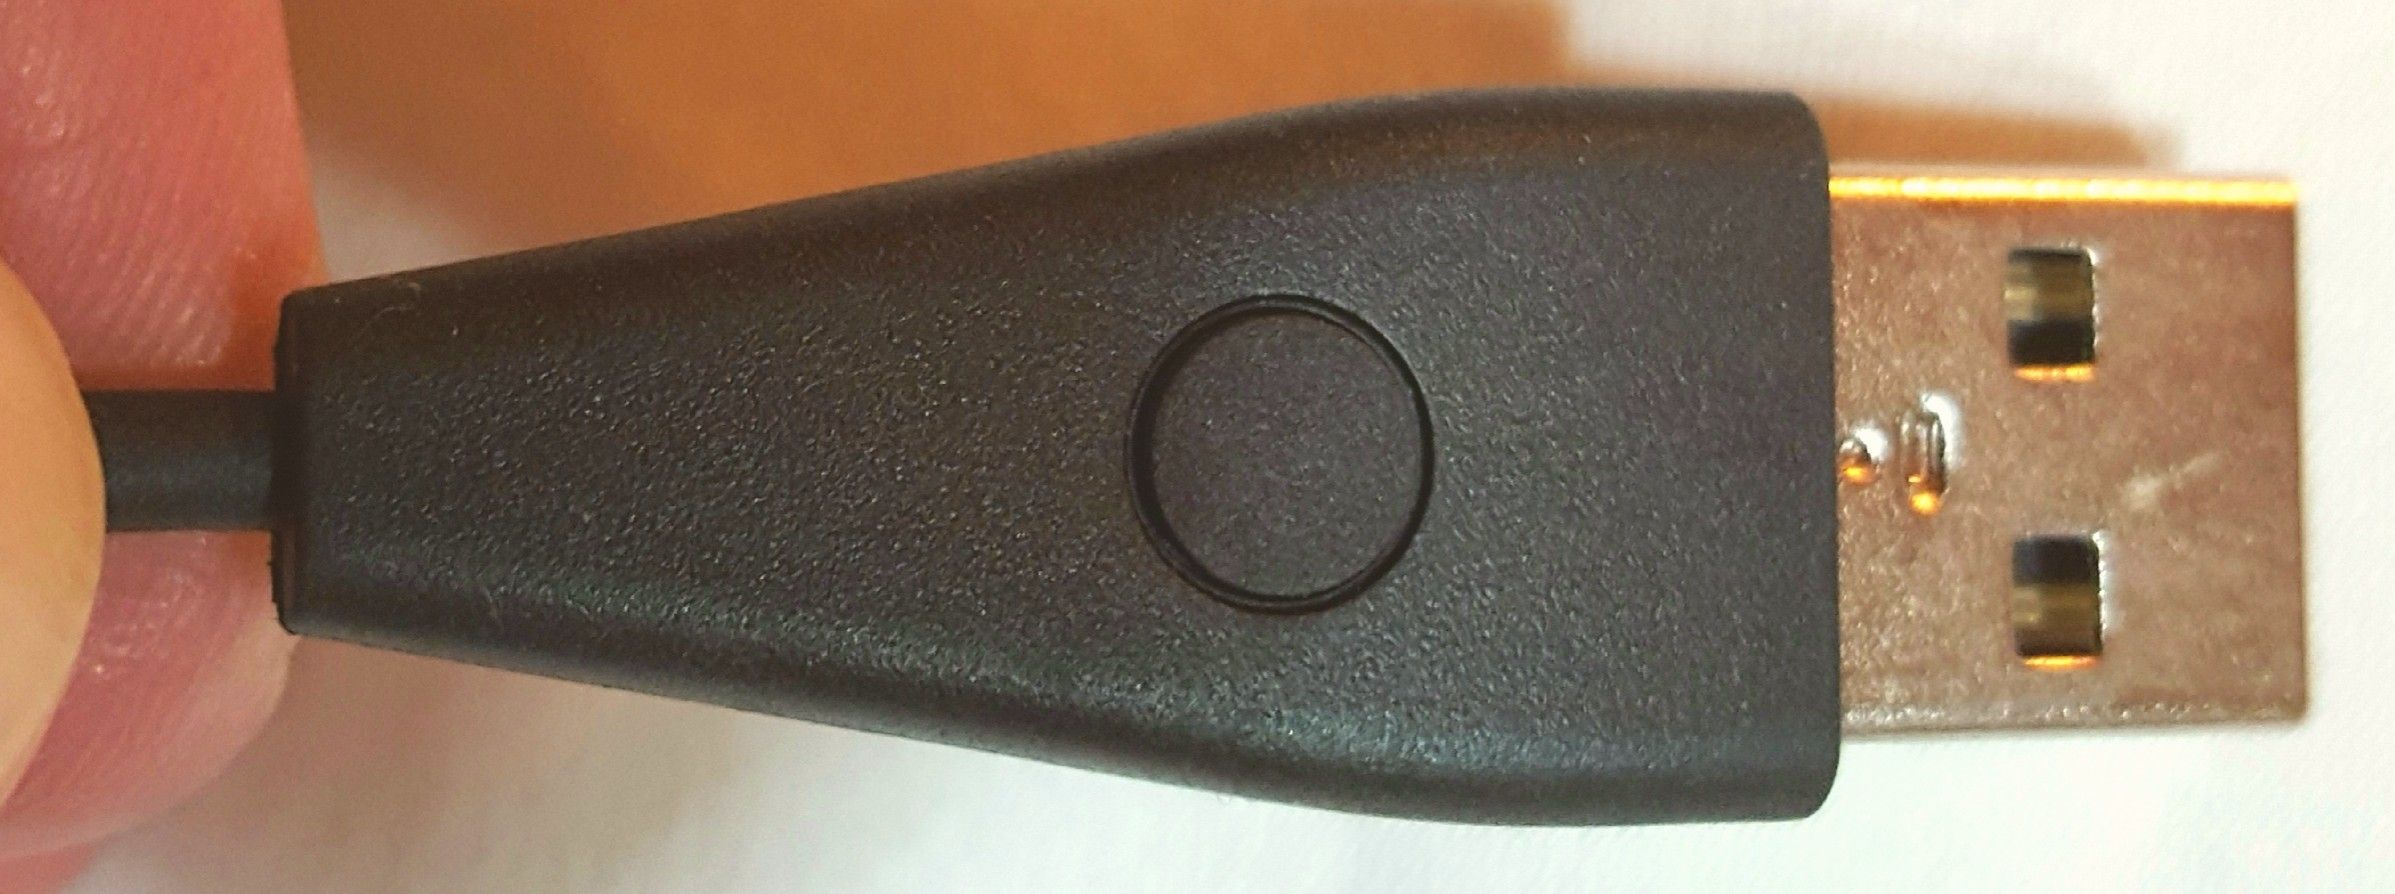 fitbit alta charging cable button